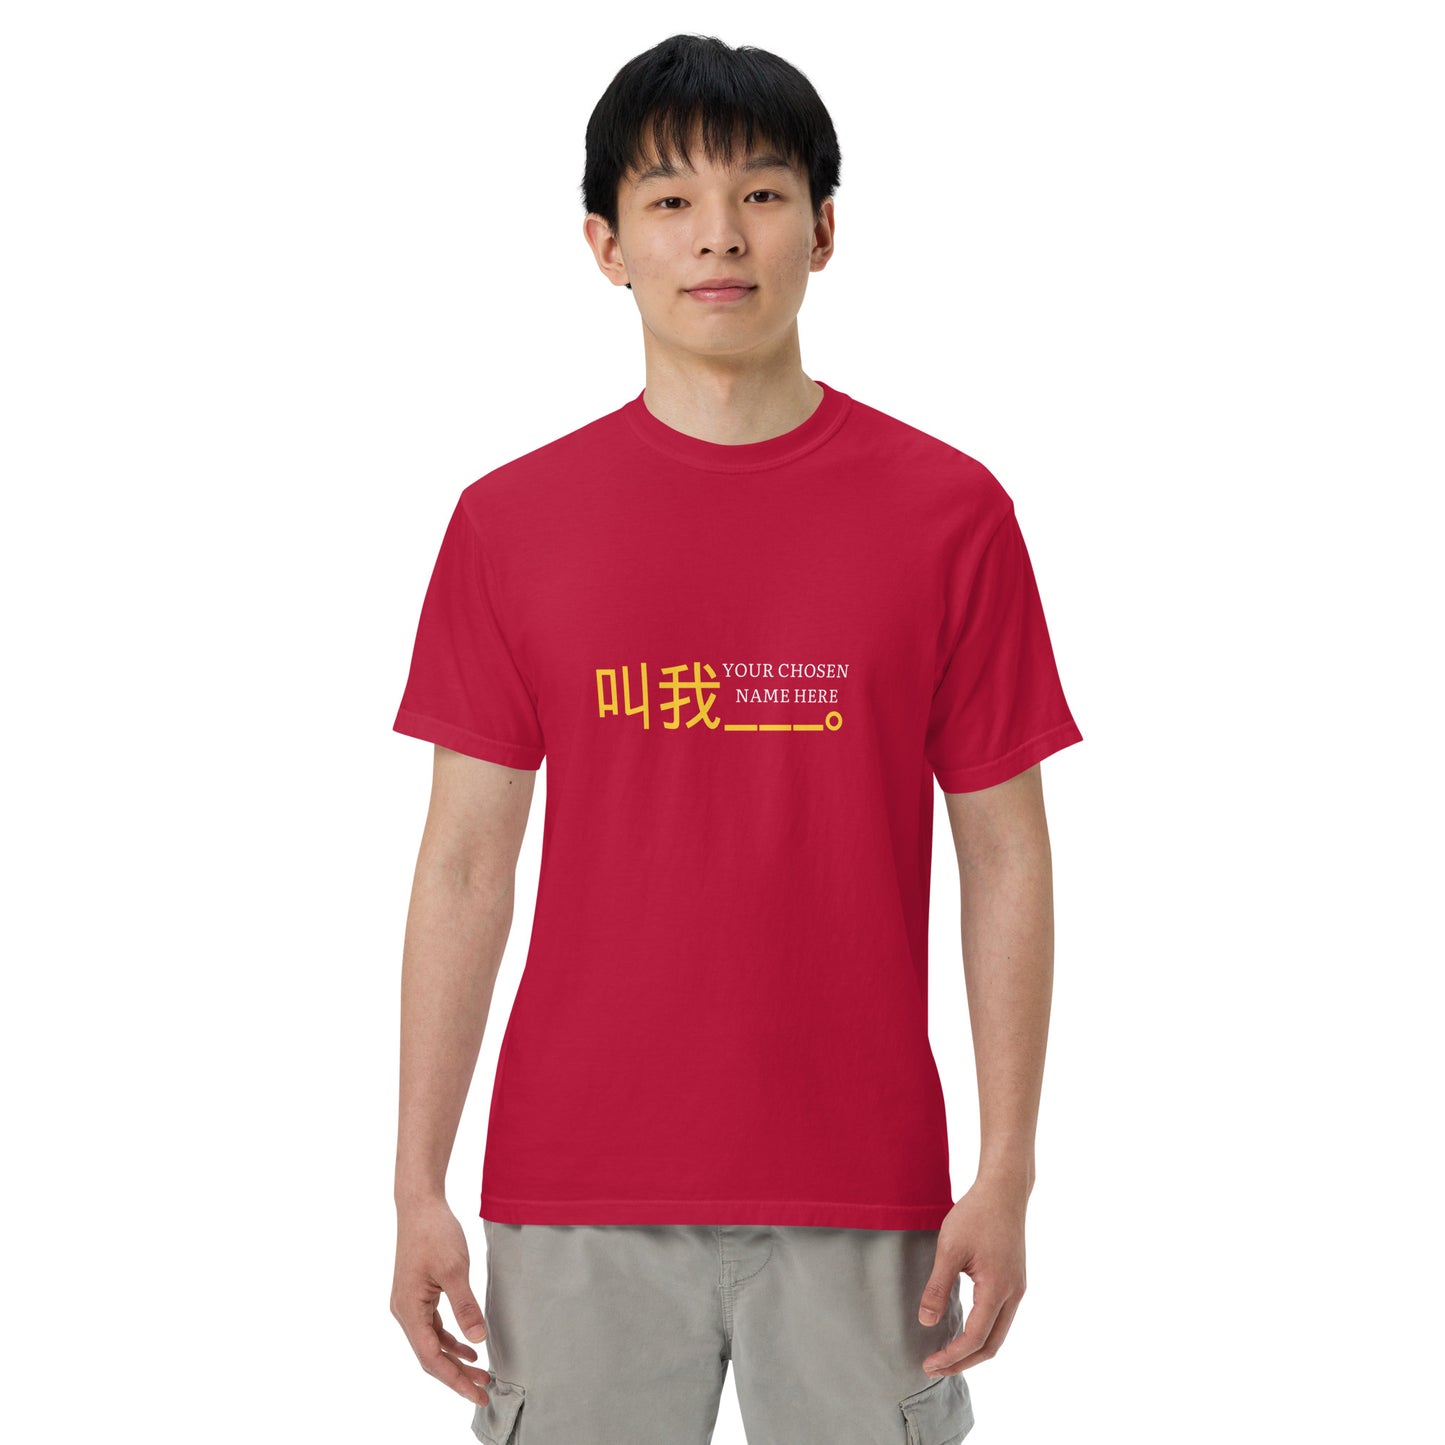 Mandarin Chinese Characters T-shirt, Funny, Humorous writing, Teacher  Approved, personalize with your name, call me xxx叫我